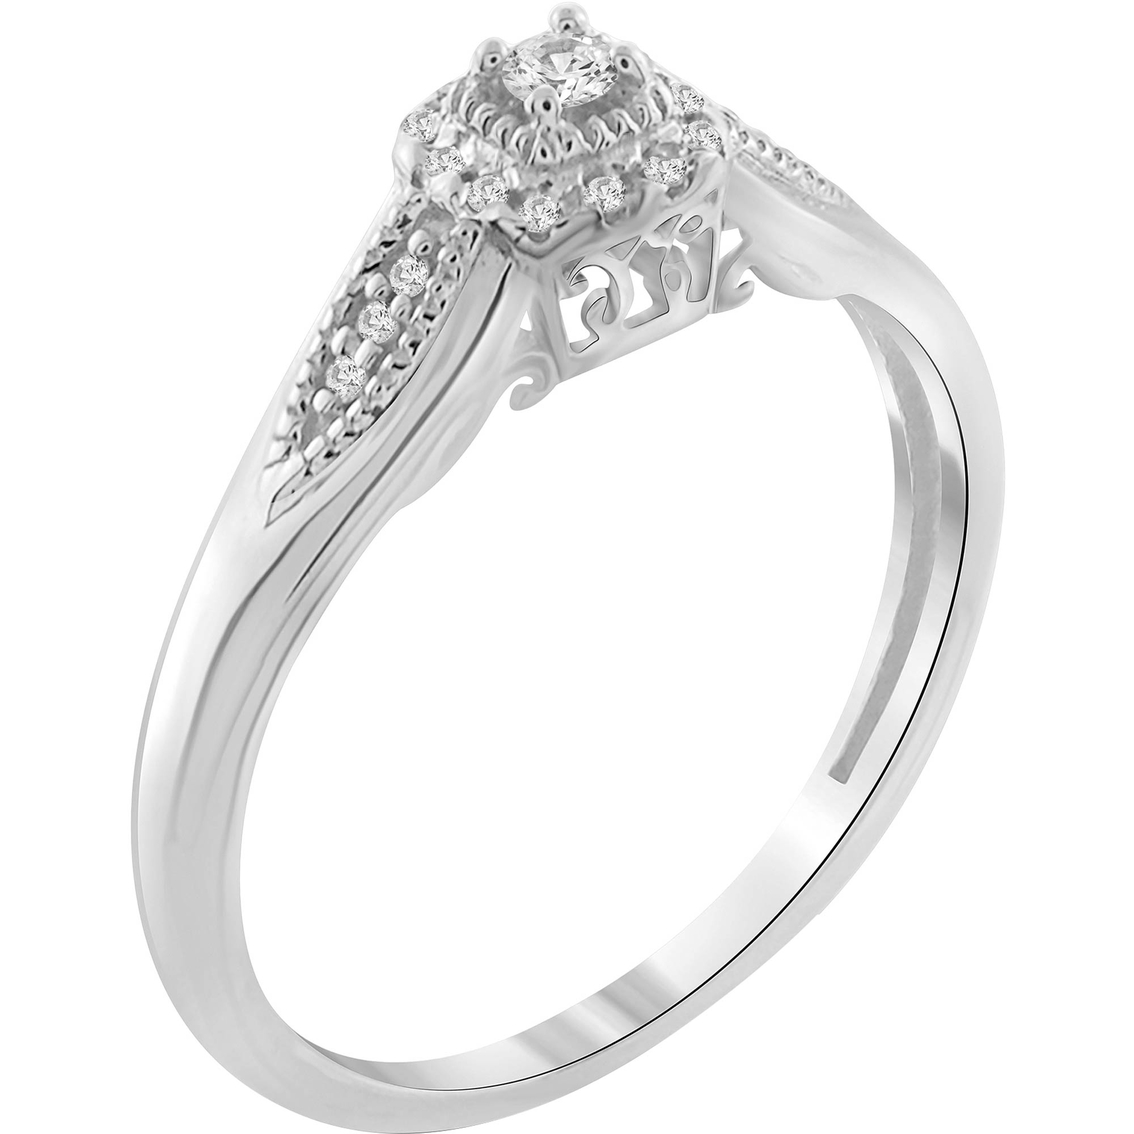 She Shines Sterling Silver 1/10 CTW Diamond Promise Fashion Ring - Image 2 of 4